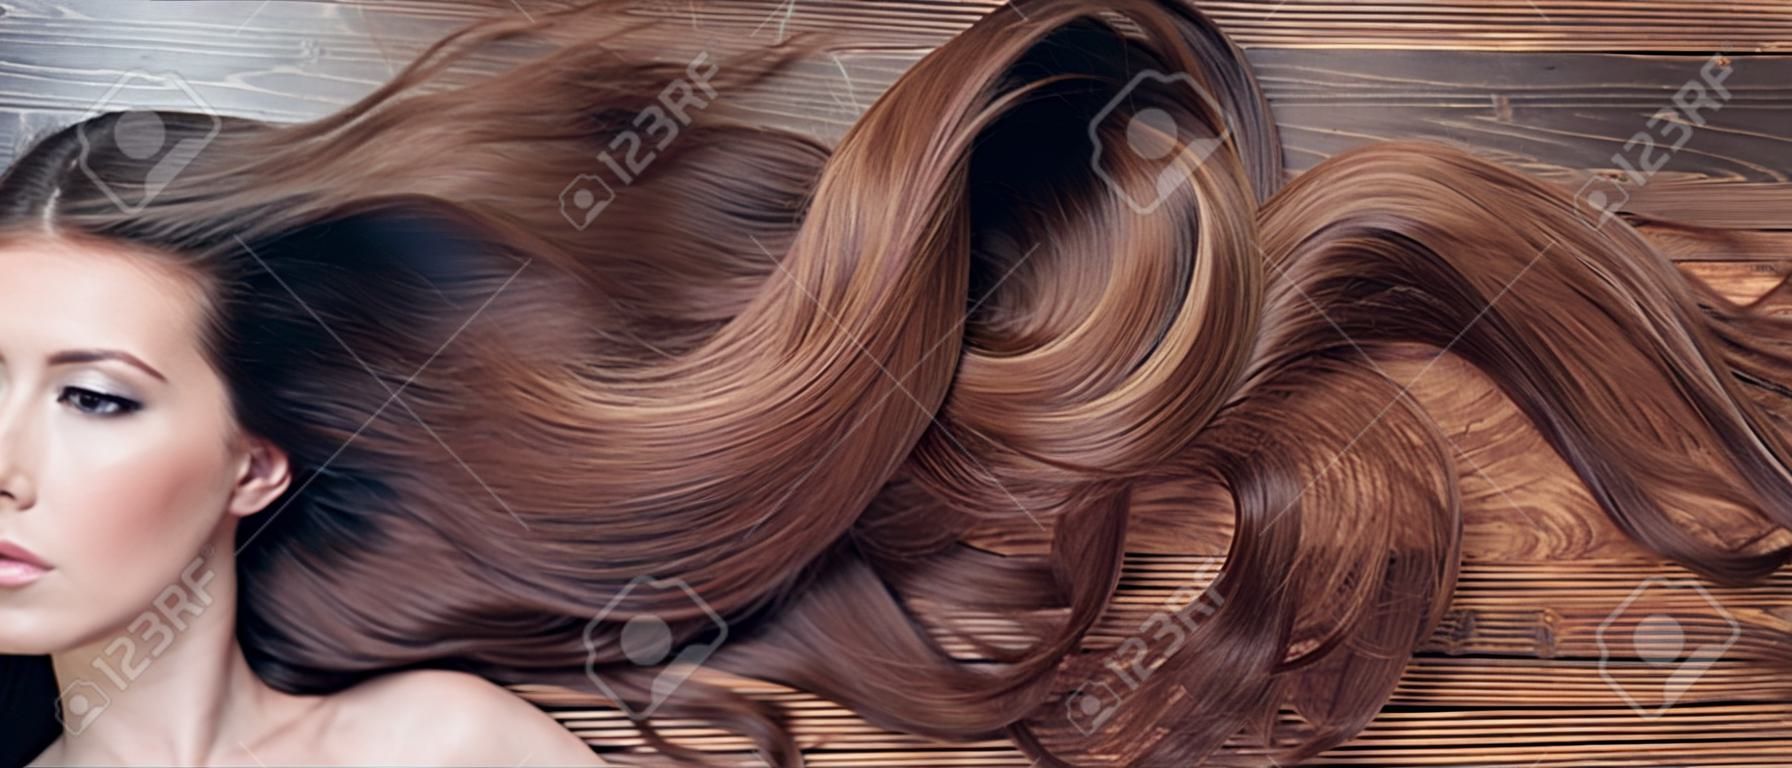 Woman with beautiful long hair on wooden background. Long hair. Trendy haircuts. Beauty hair Salon.